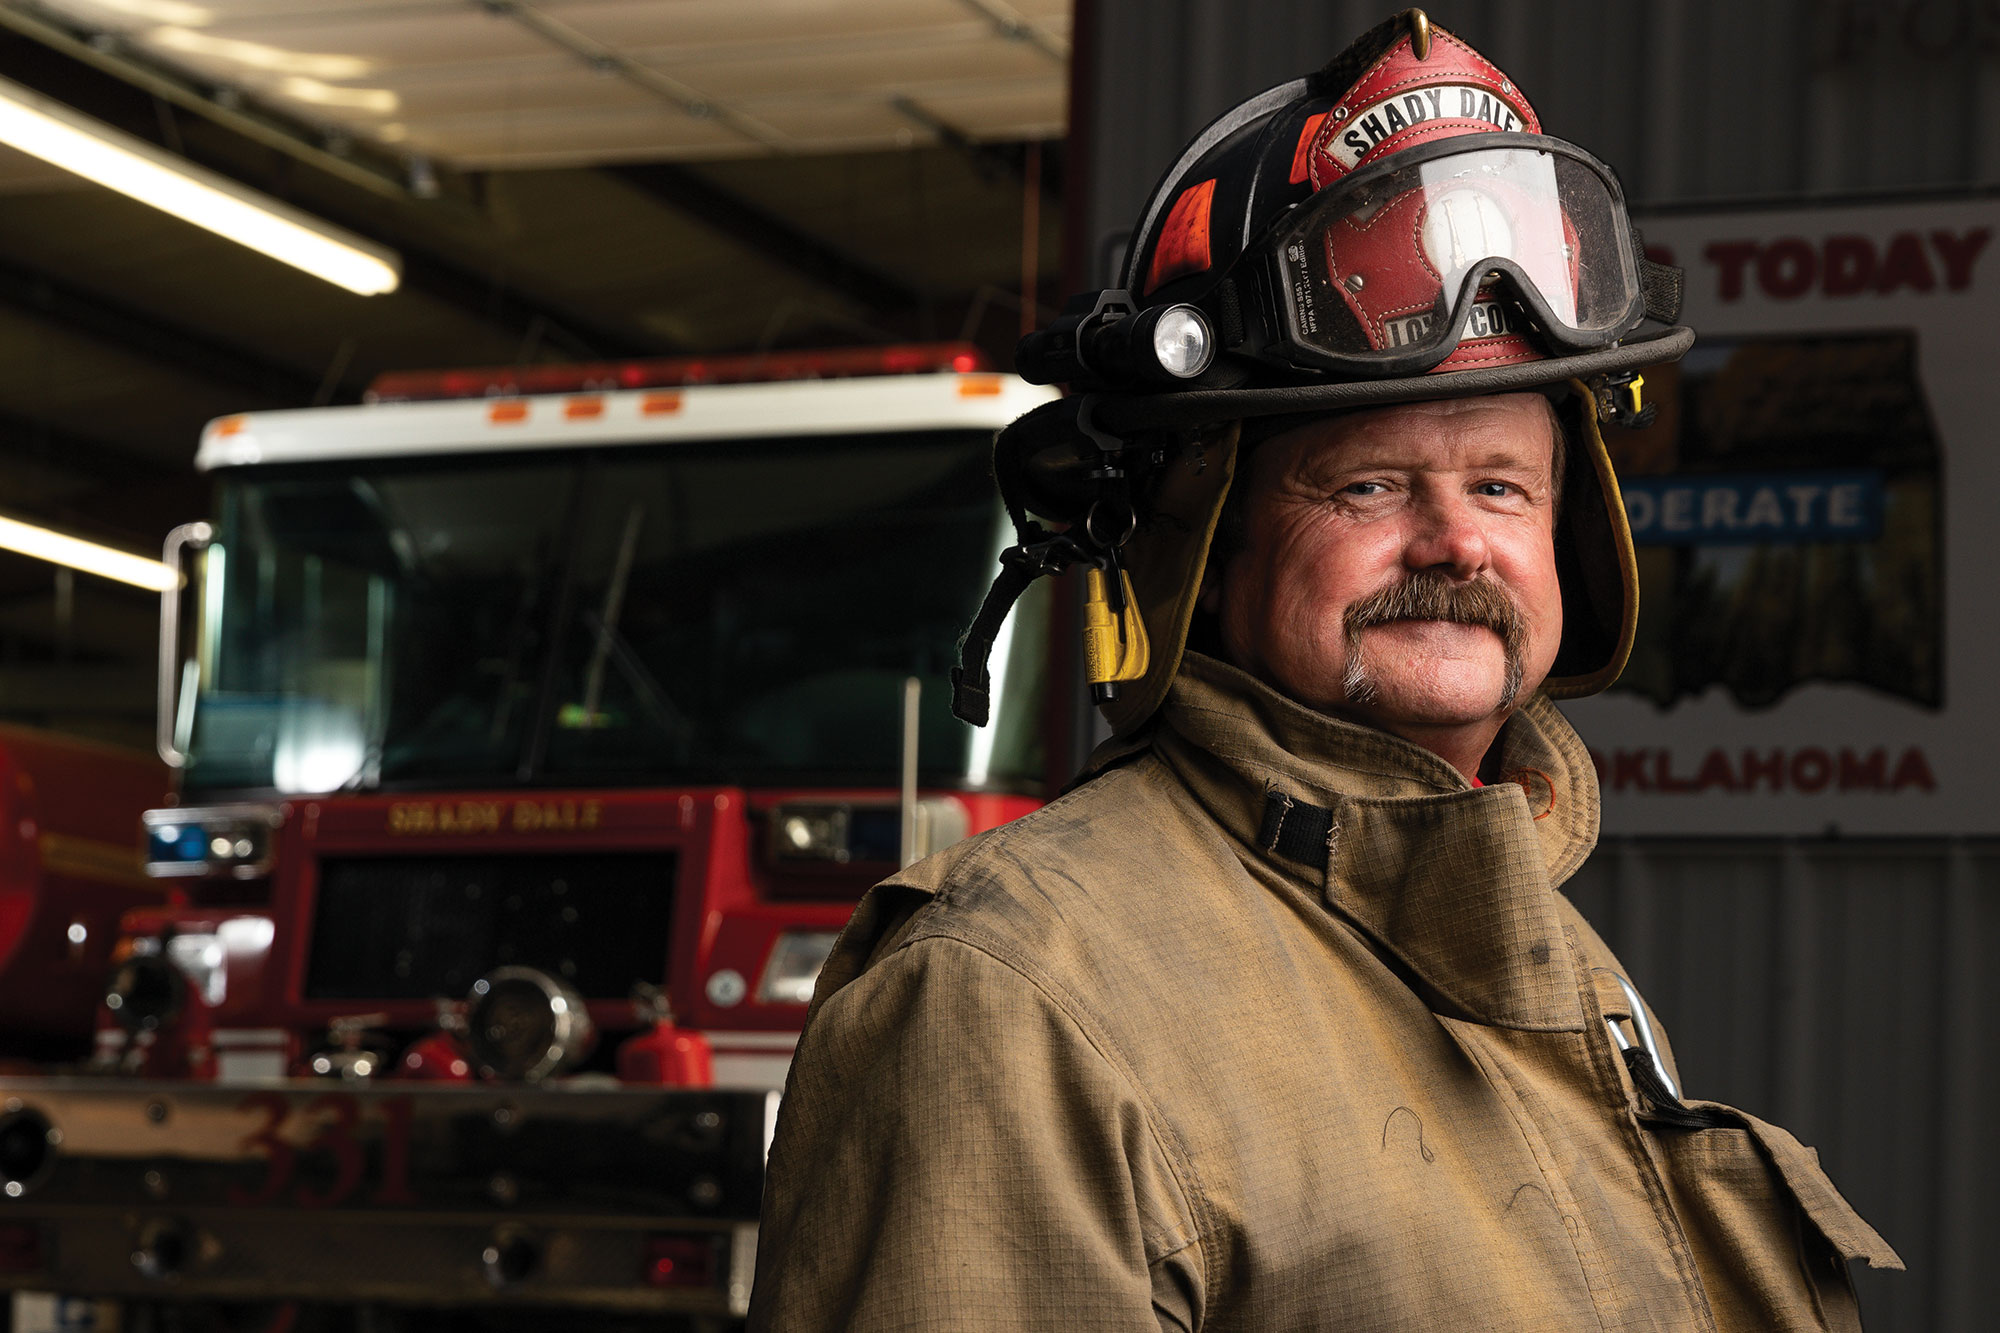 Tim Boatright, an agricultural equipment mechanic at the Noble Research Institute, serves as the captain of the Shady Dale Volunteer Fire Department in Love County, Oklahoma.